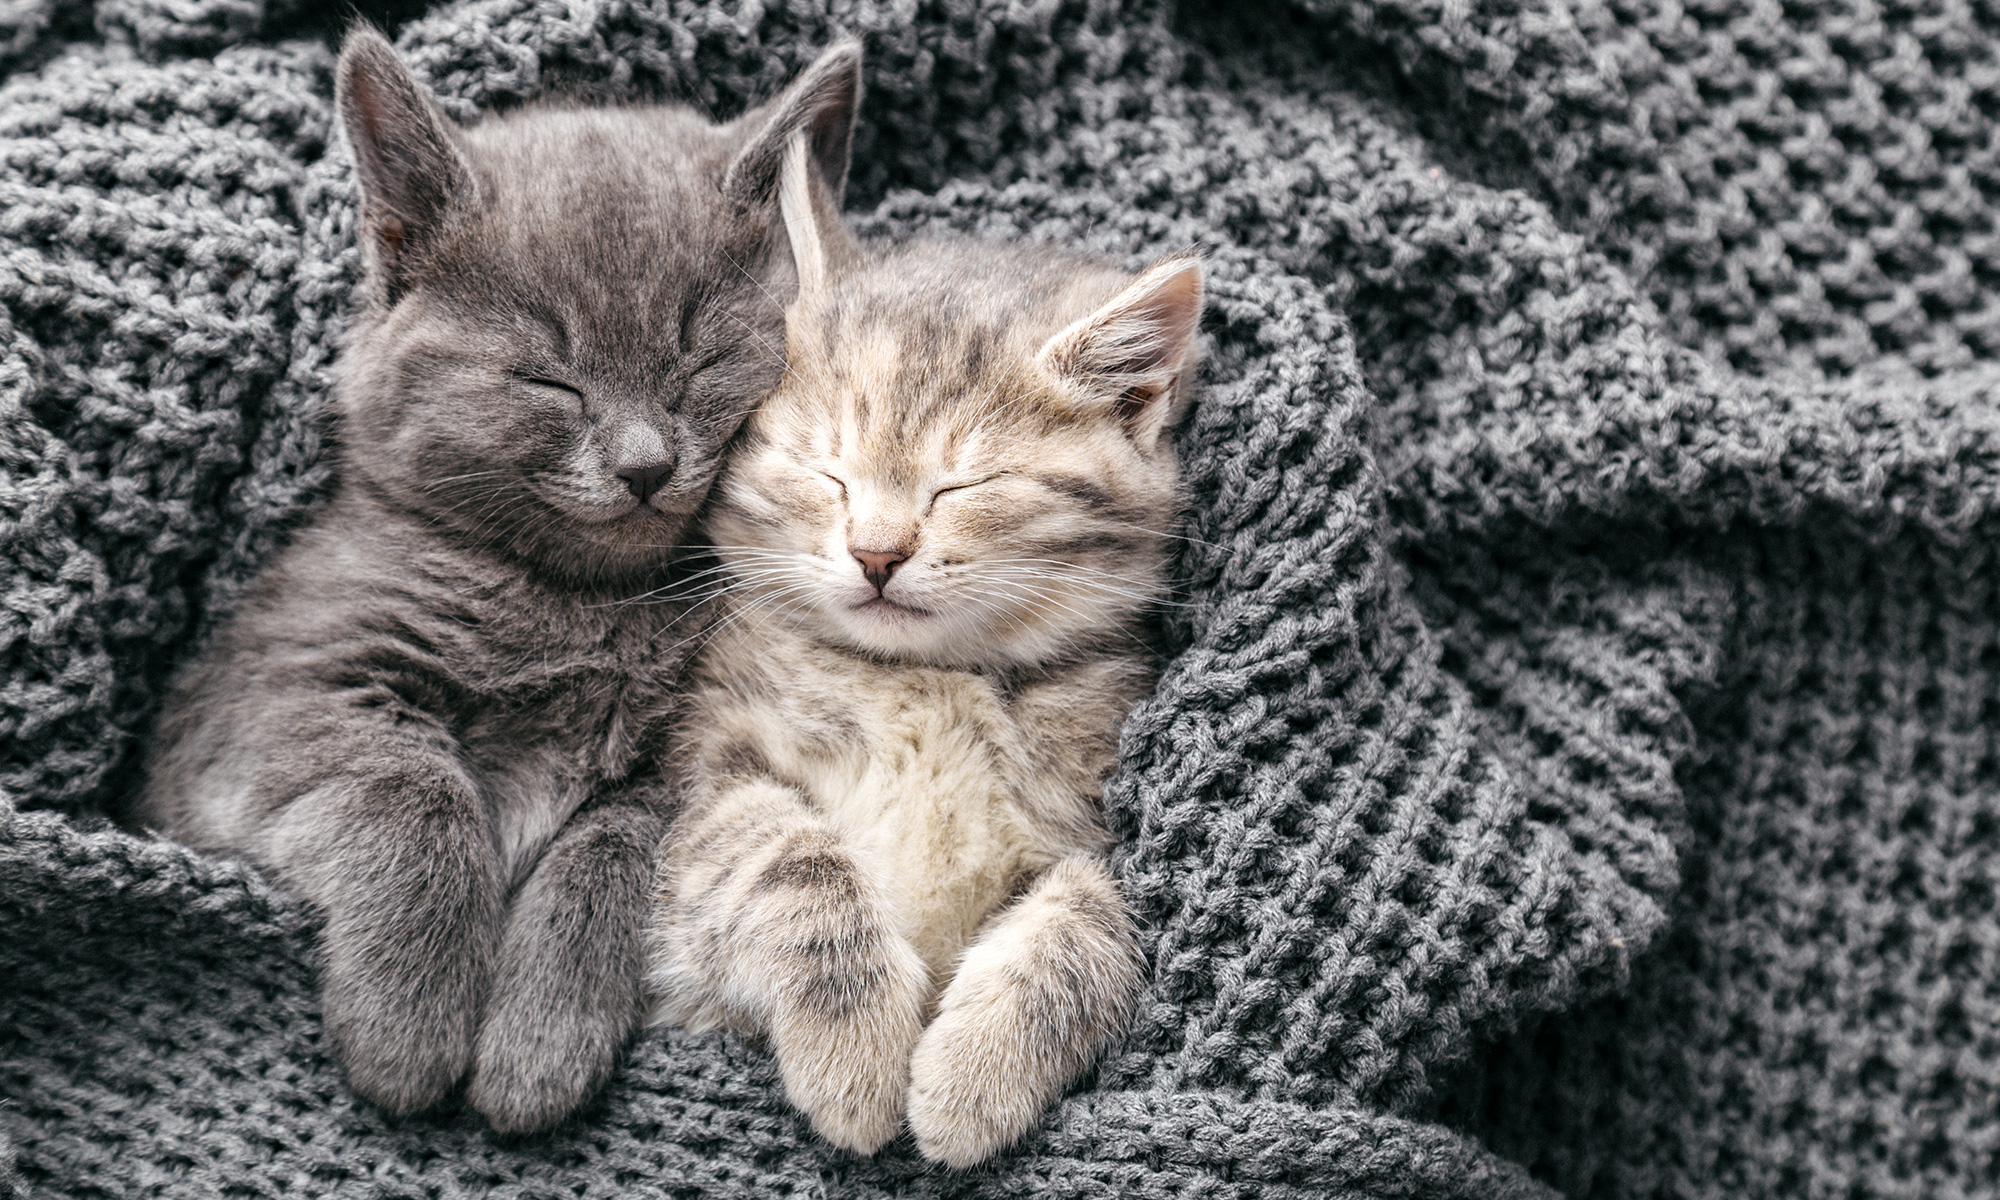 Cat Sleeping Positions and What they Mean